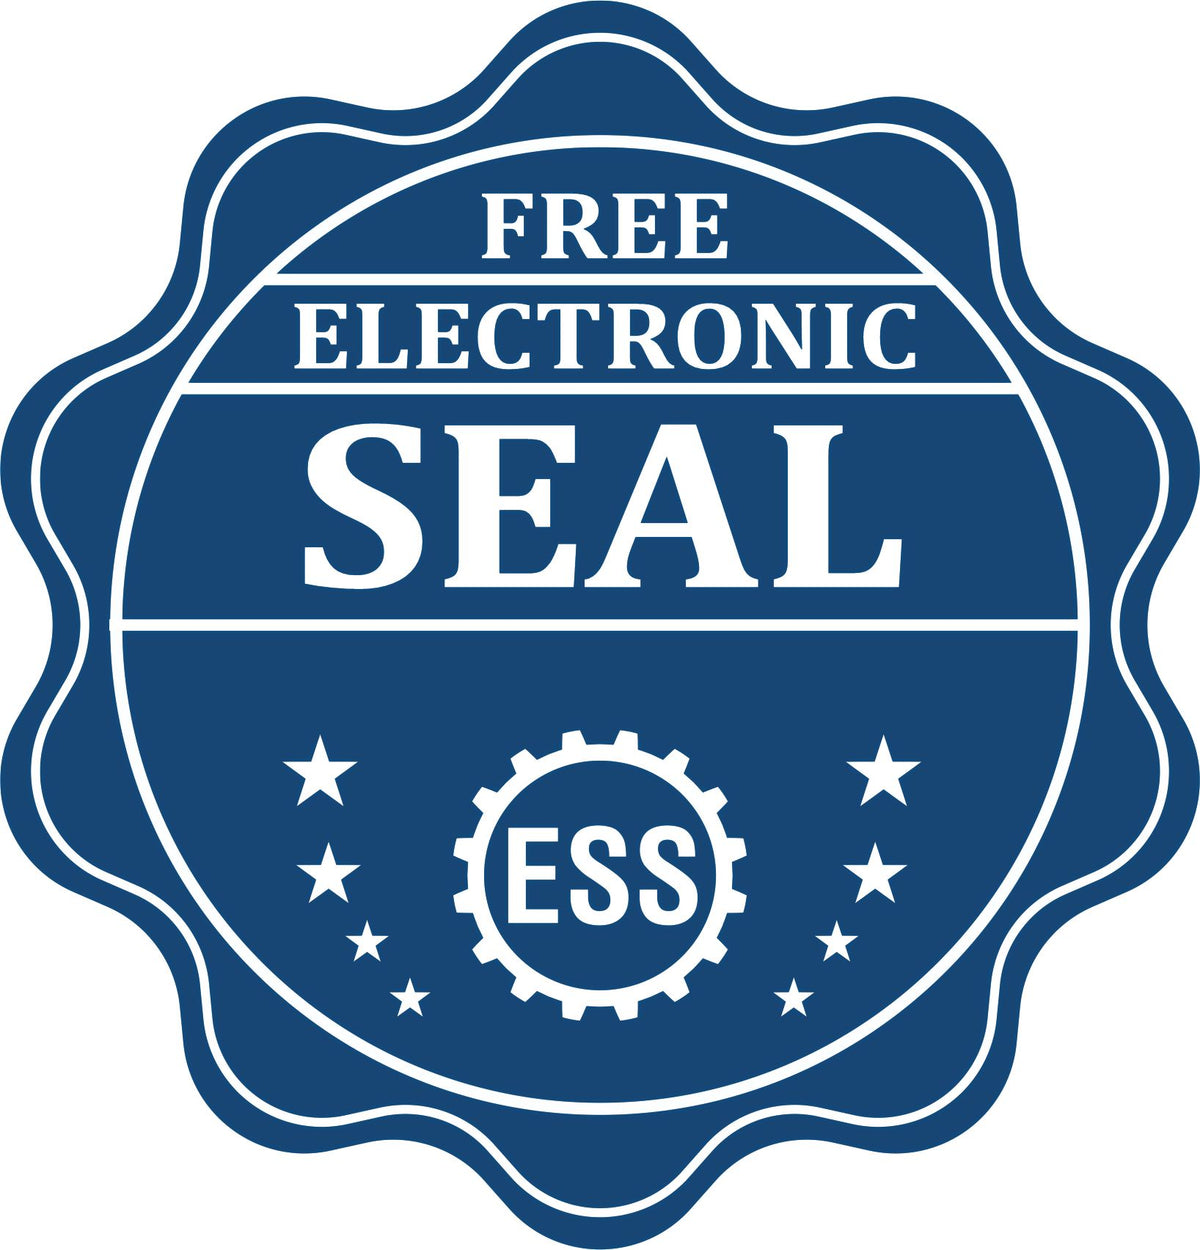 A badge showing a free electronic seal for the Wooden Handle Pennsylvania Rectangular Notary Public Stamp with stars and the ESS gear on the emblem.